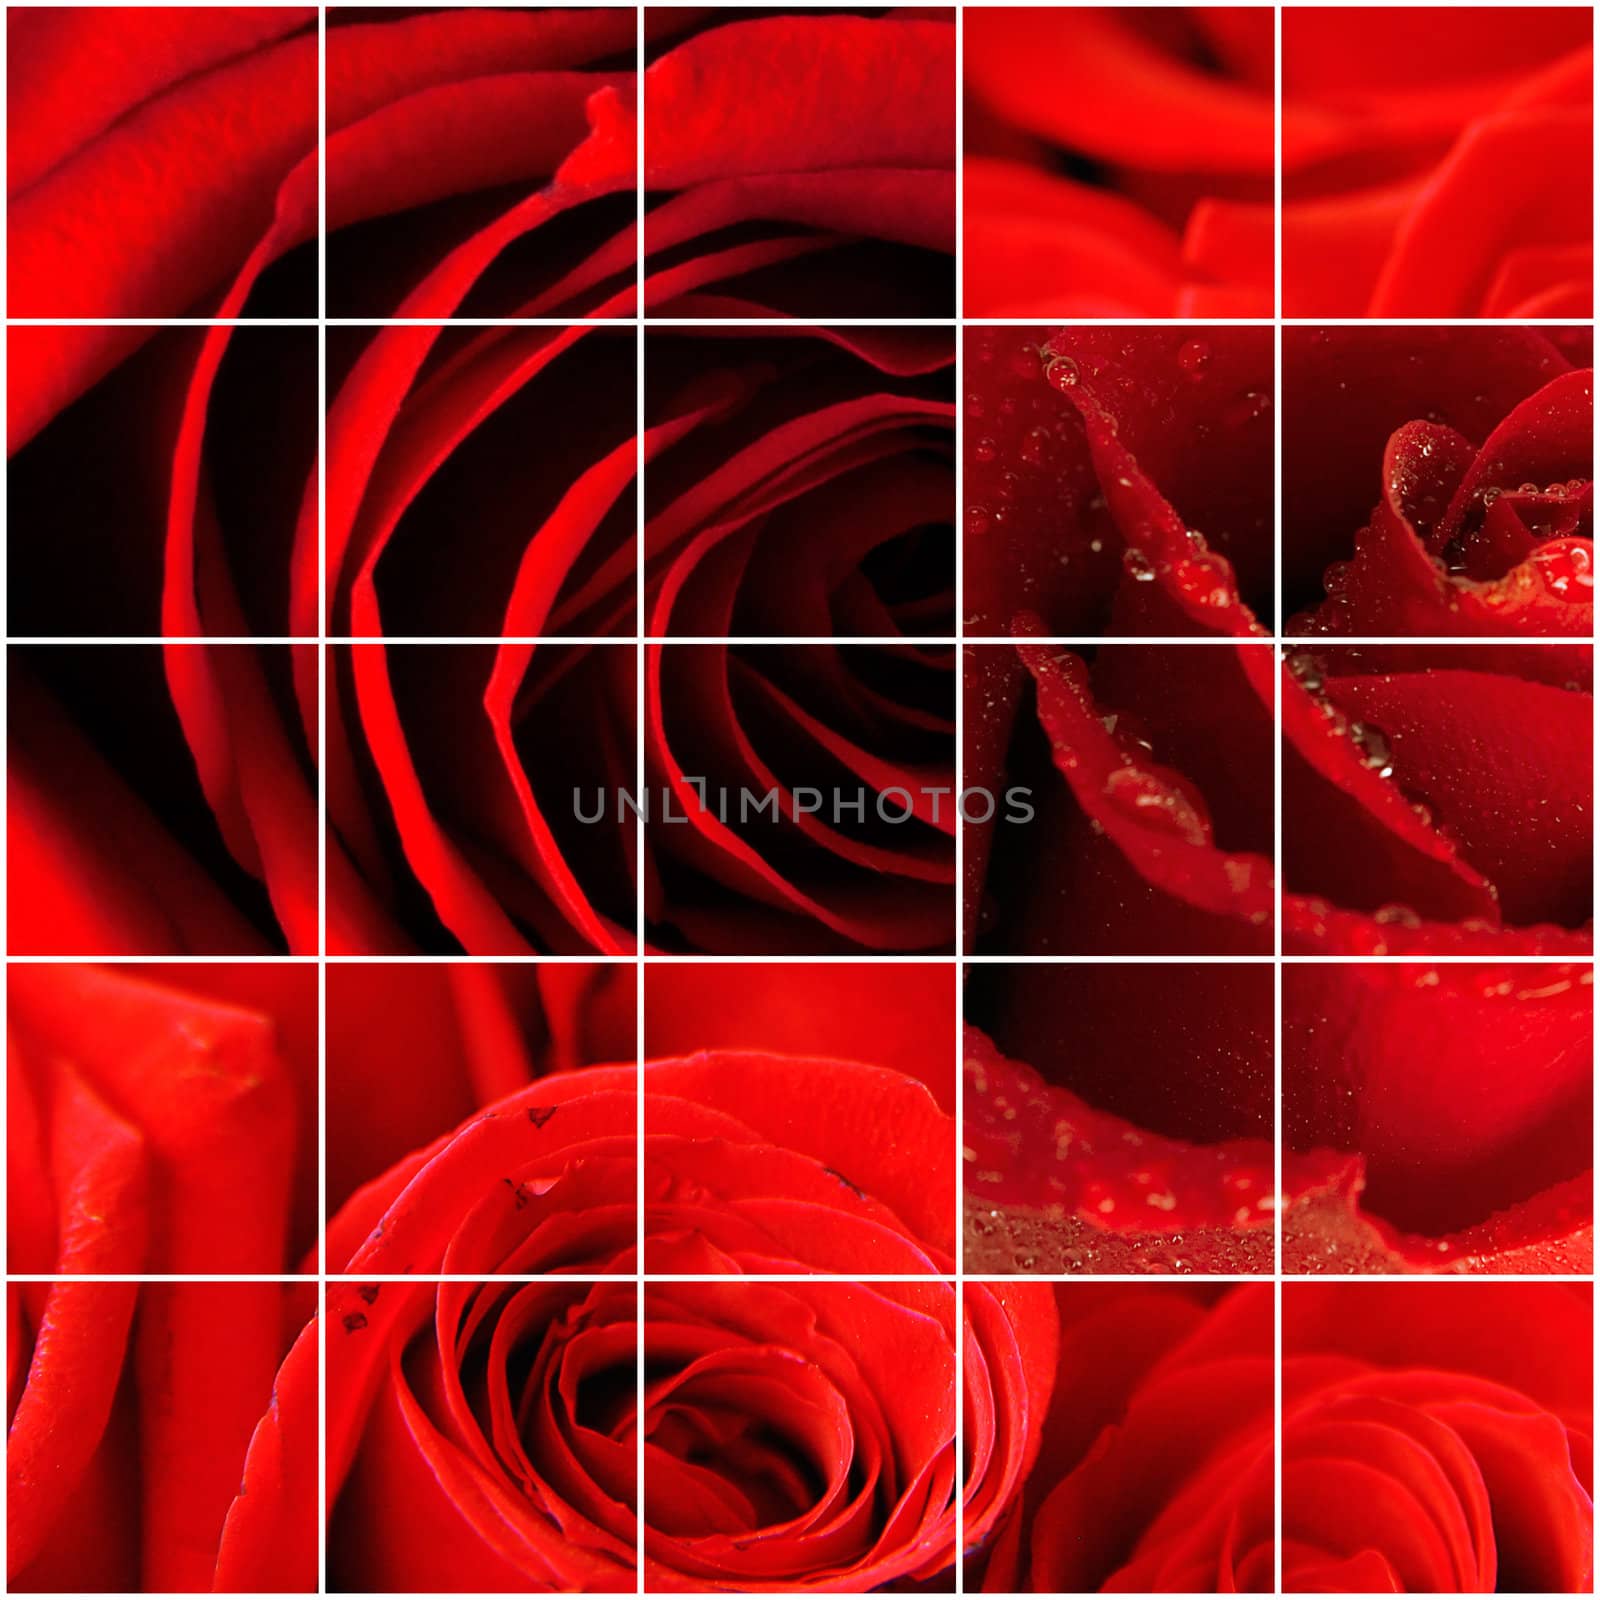 bright red rose petals as a celebratory background by Serp